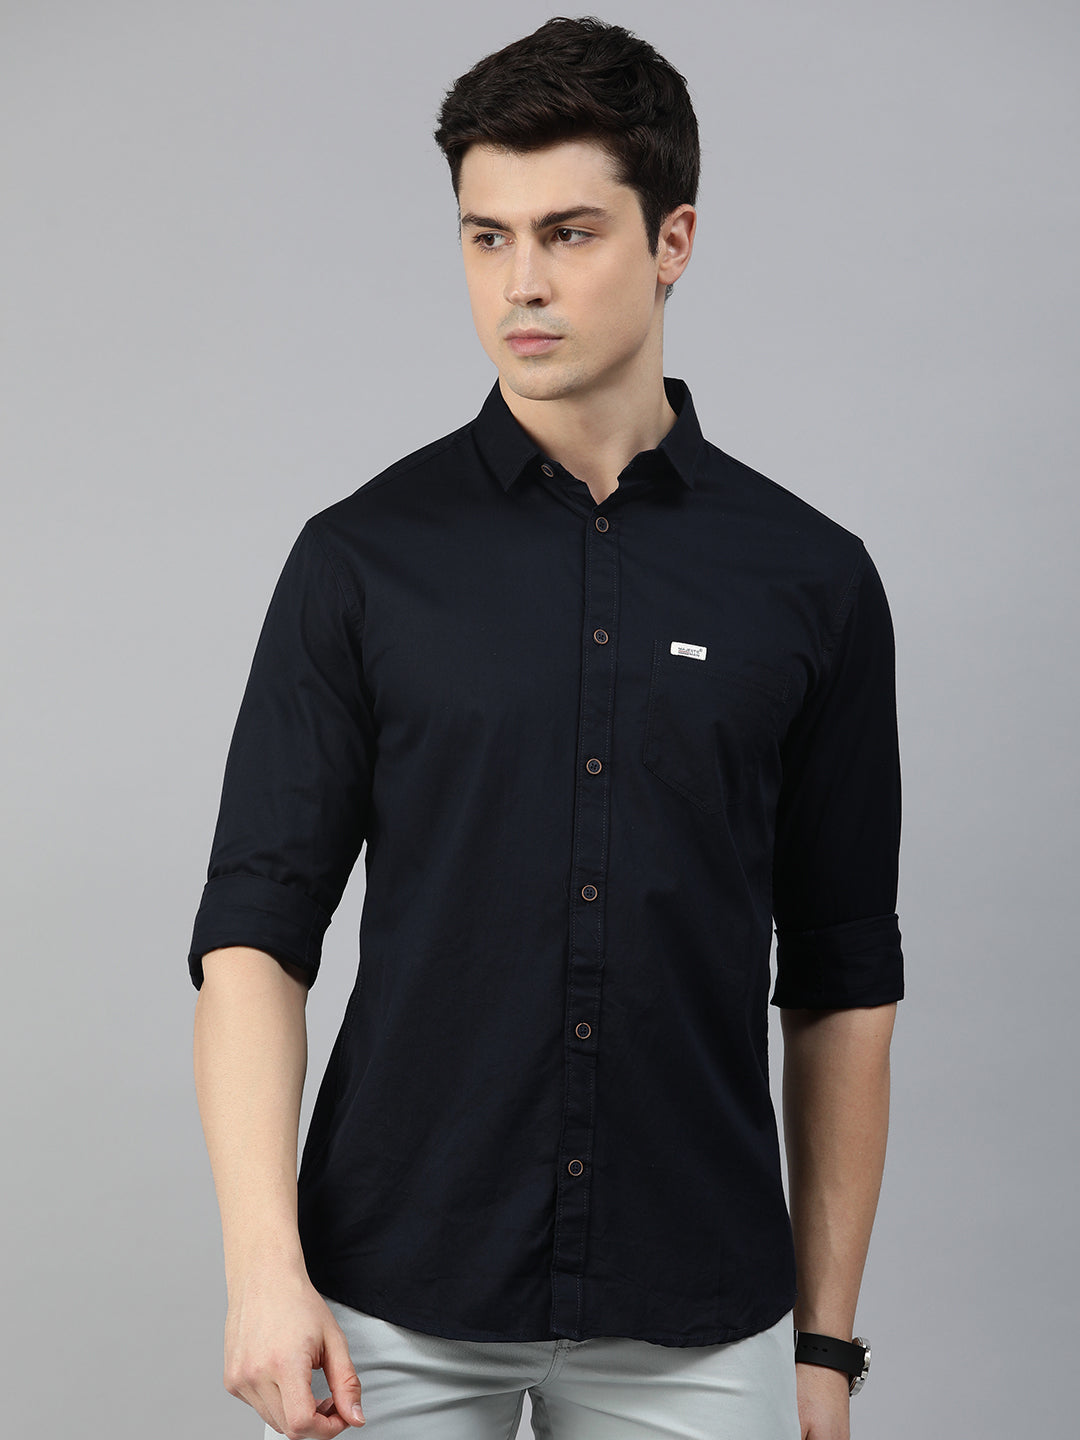 Majestic Man Comfort Slim Fit Solid Cotton Casual Shirt - Navy Blue